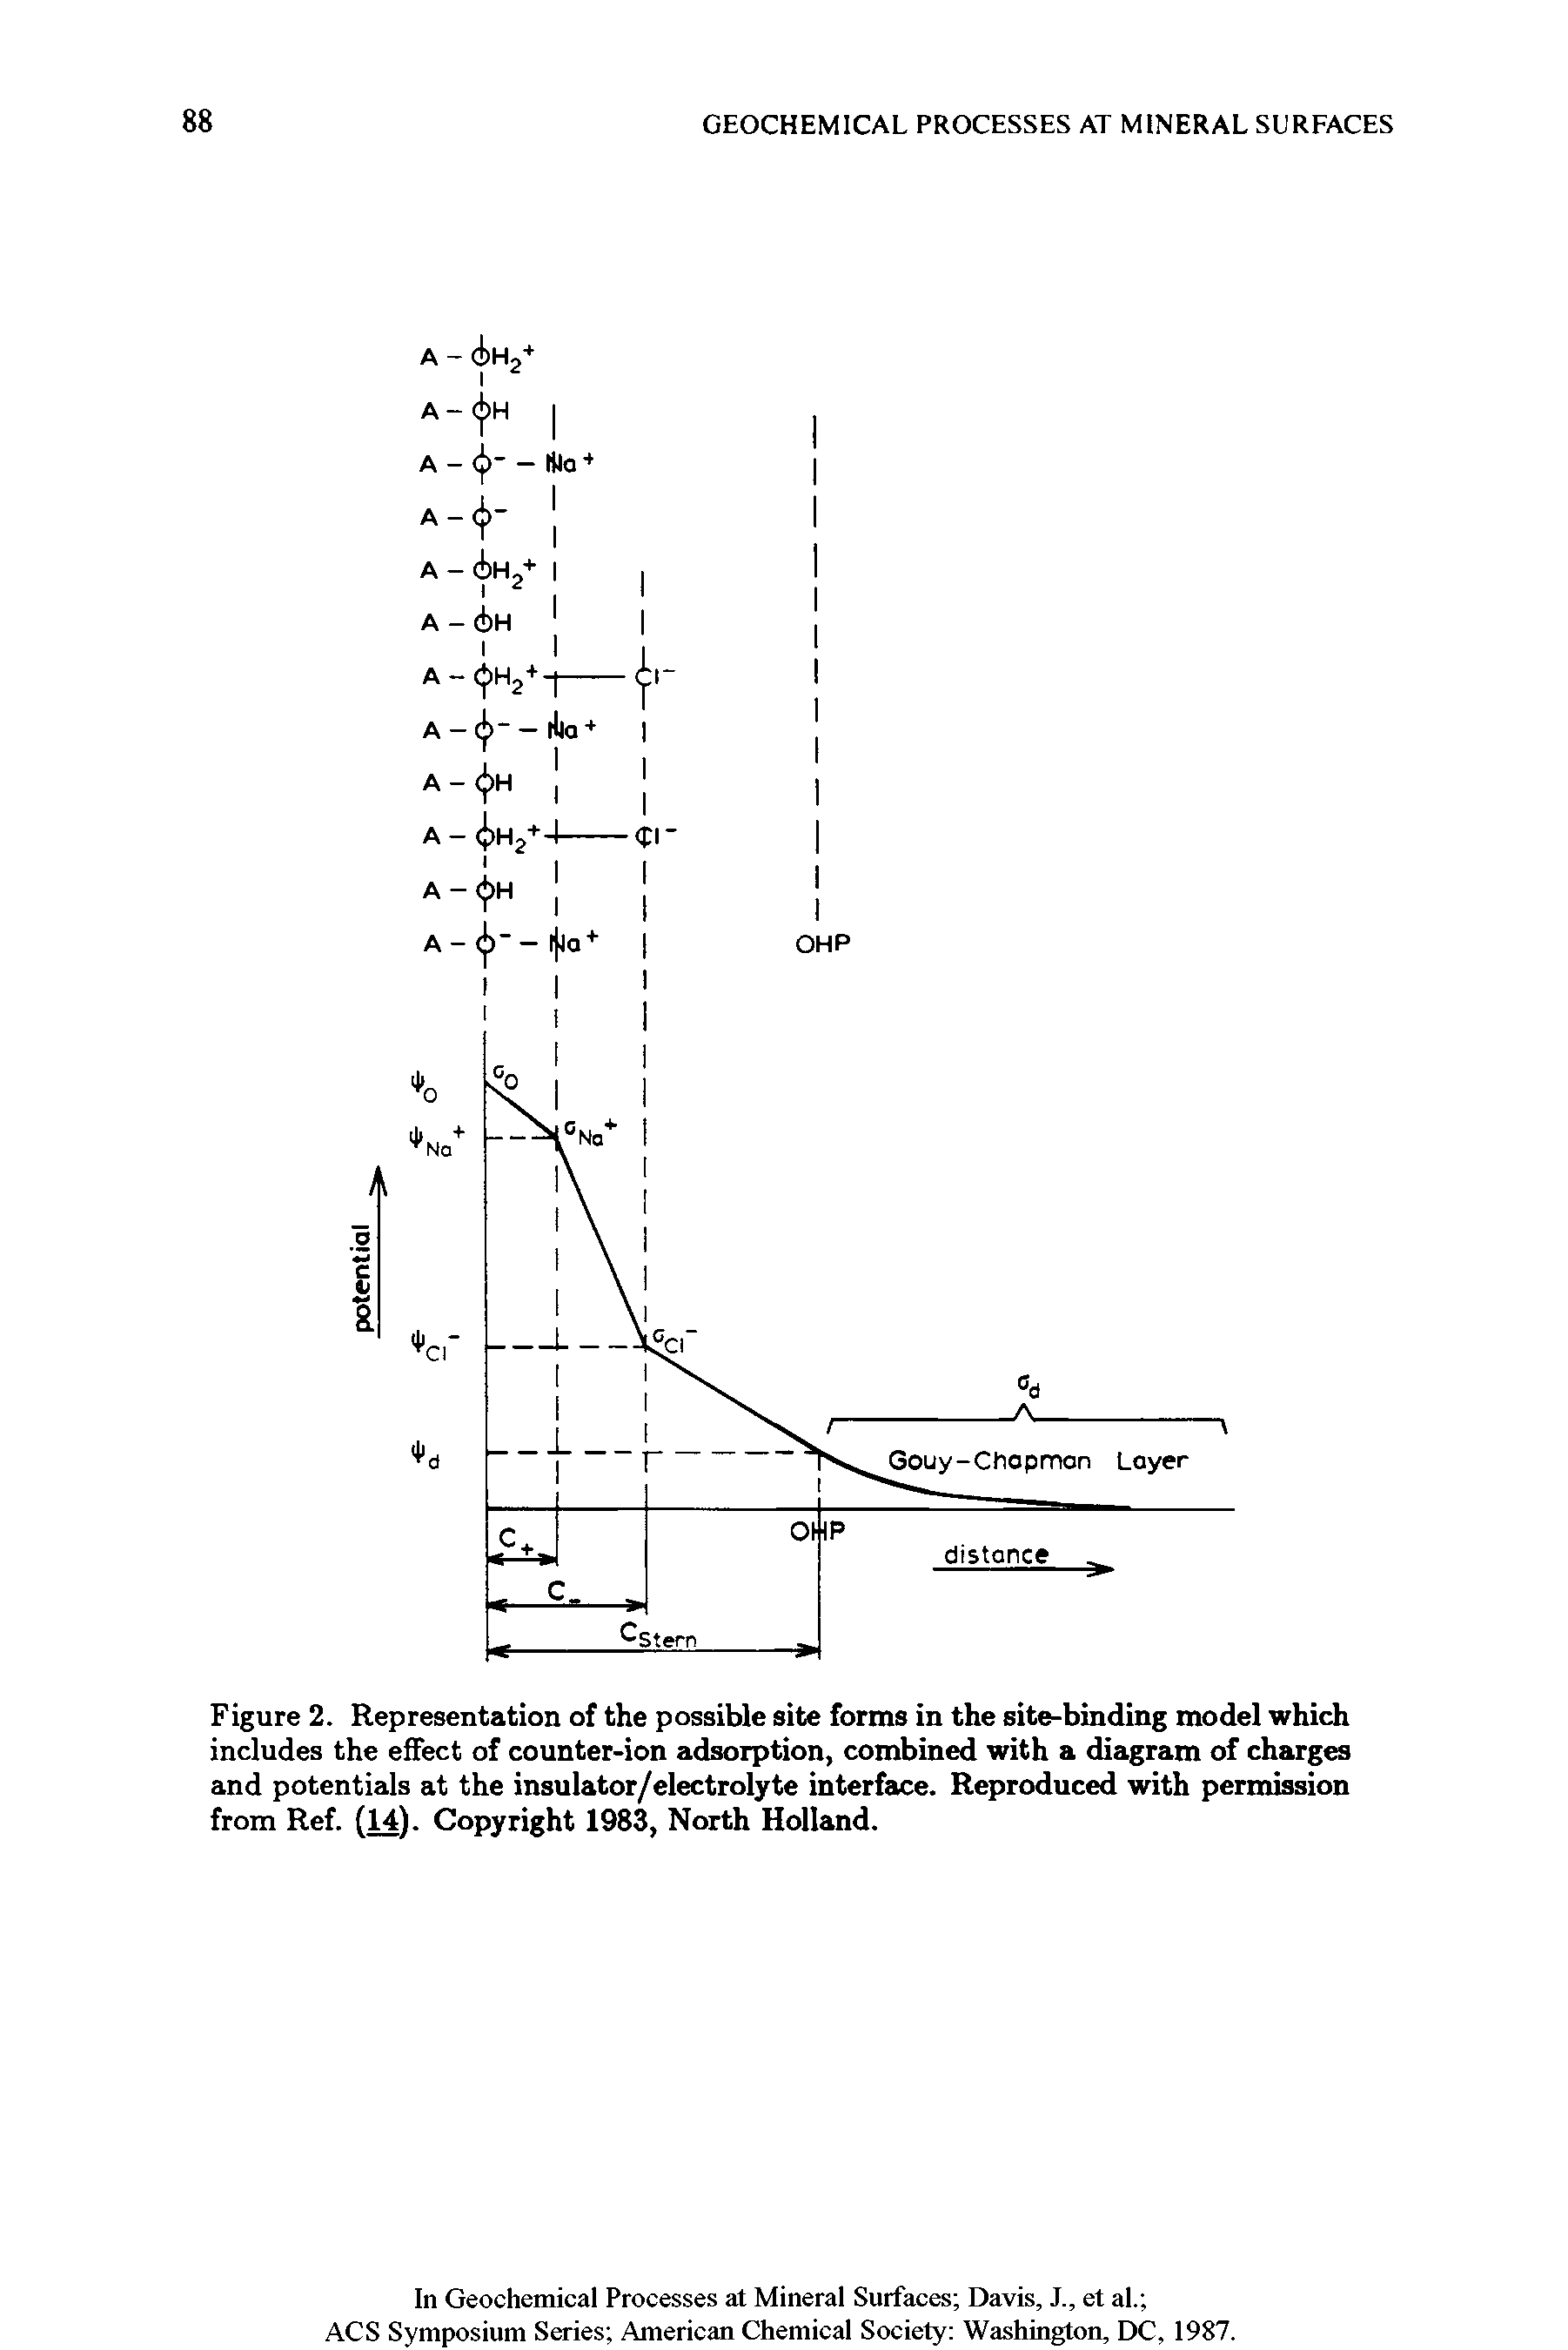 Figure 2. Representation of the possible site forms in the site-binding model which includes the effect of counter-ion adsorption, combined with a diagram of charges and potentials at the insulator/electrolyte interface. Reproduced with permission from Ref. (14). Copyright 1983, North Holland.